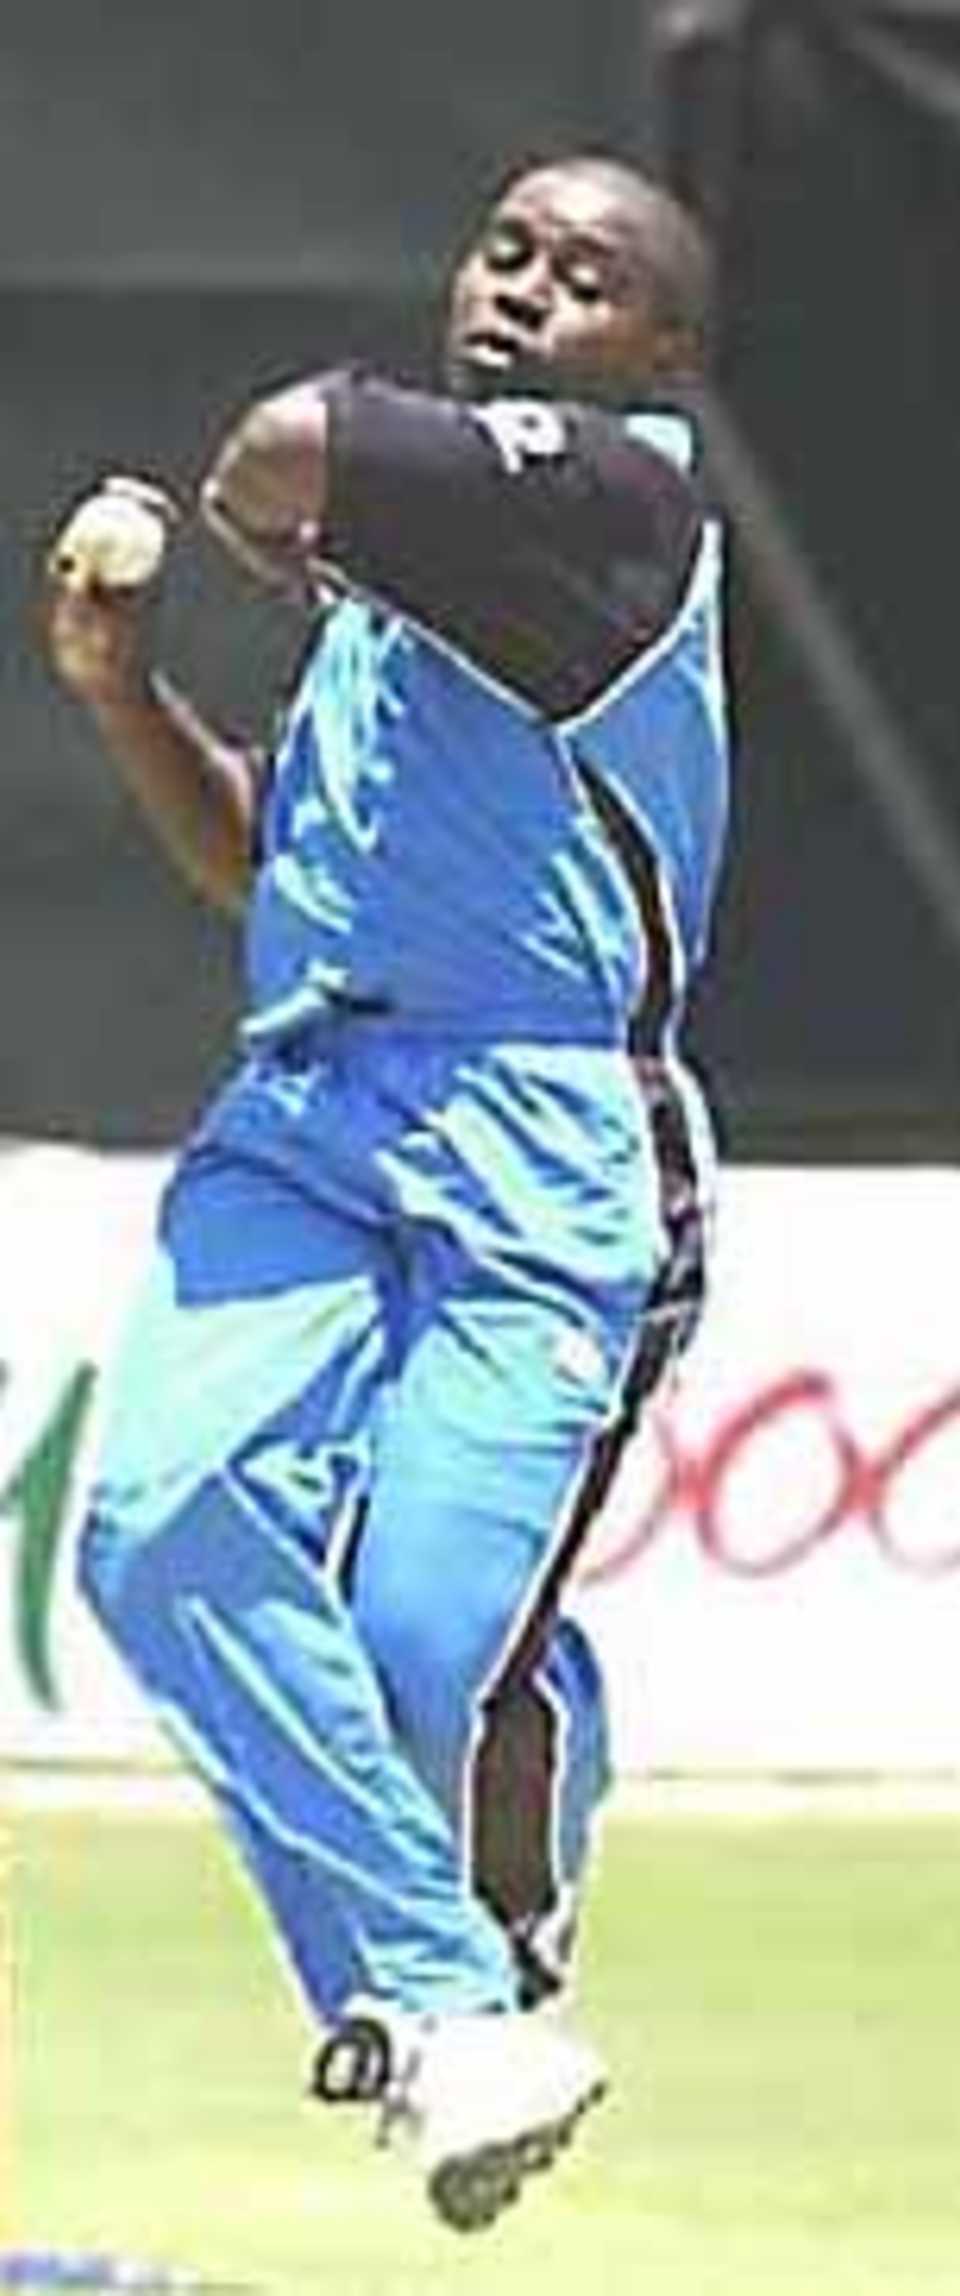 Mark Alleyne bowling at the 2000 ICC Knock out tournament